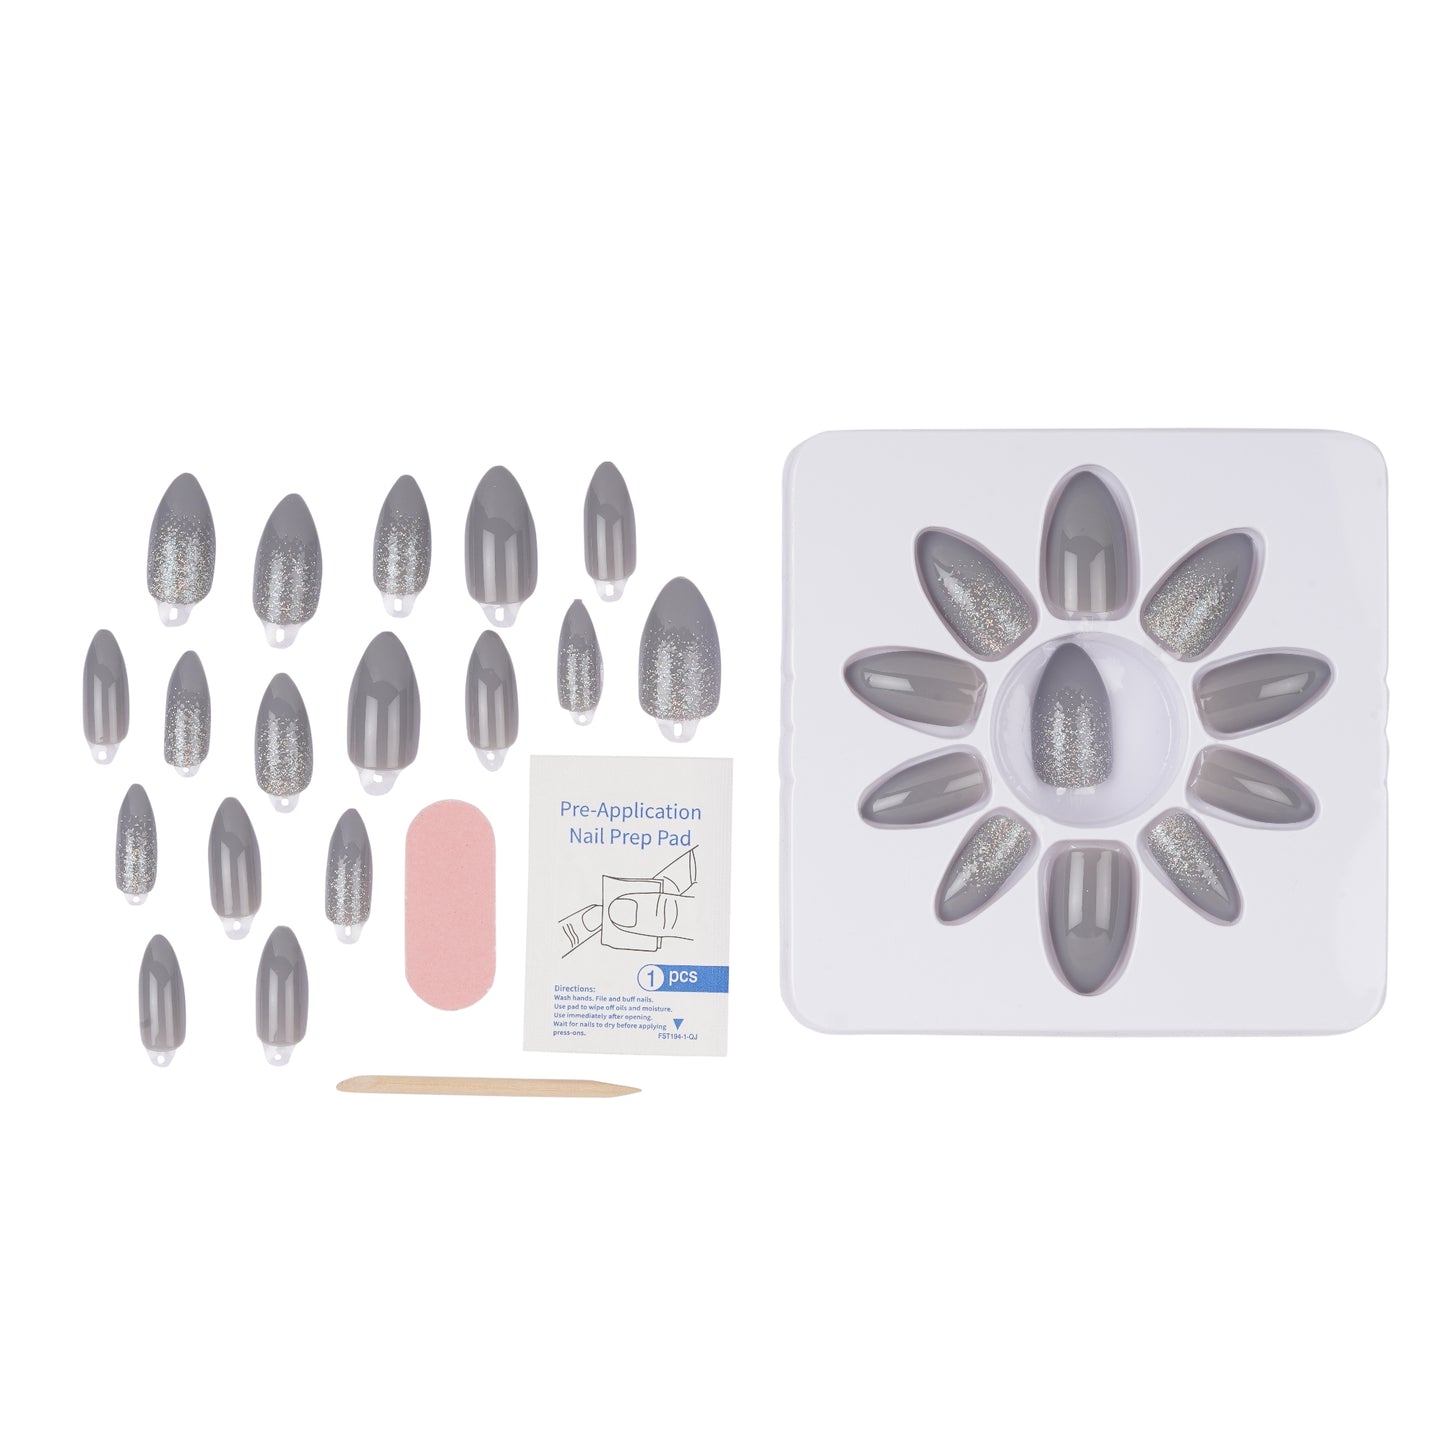 Stick On Nails |  Dove Gray Artificial Acrylic Fake Press on Nails With Quick Dry Glue